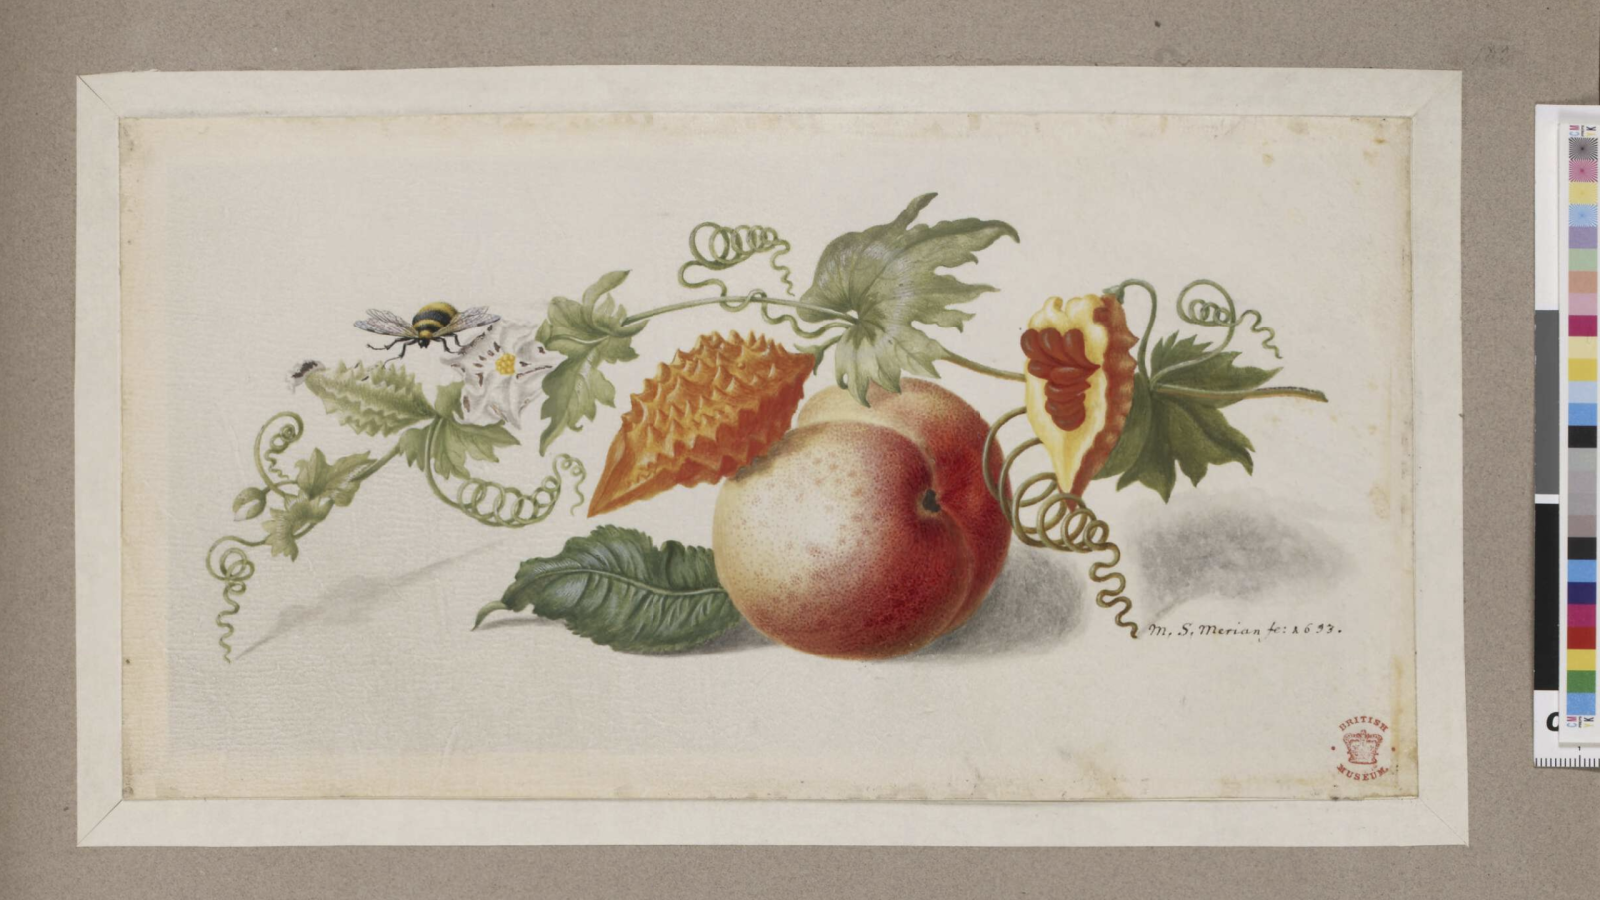 A peach and a prickly orange fruit with vine leaves and tendrils